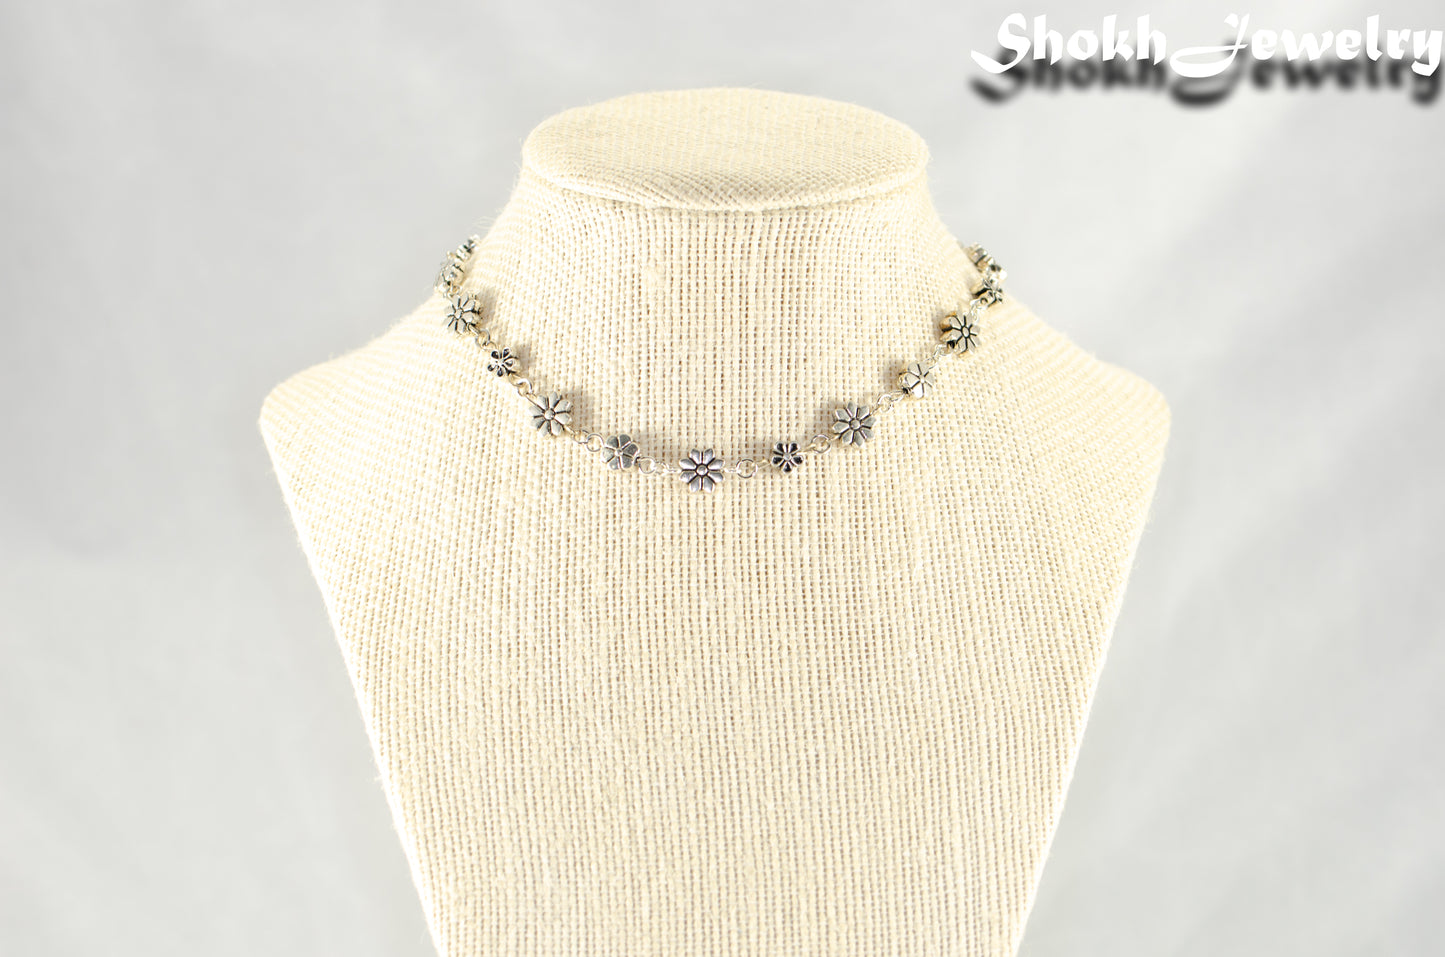 Dainty Tibetan Silver Flower Choker Necklace displayed on a bust.